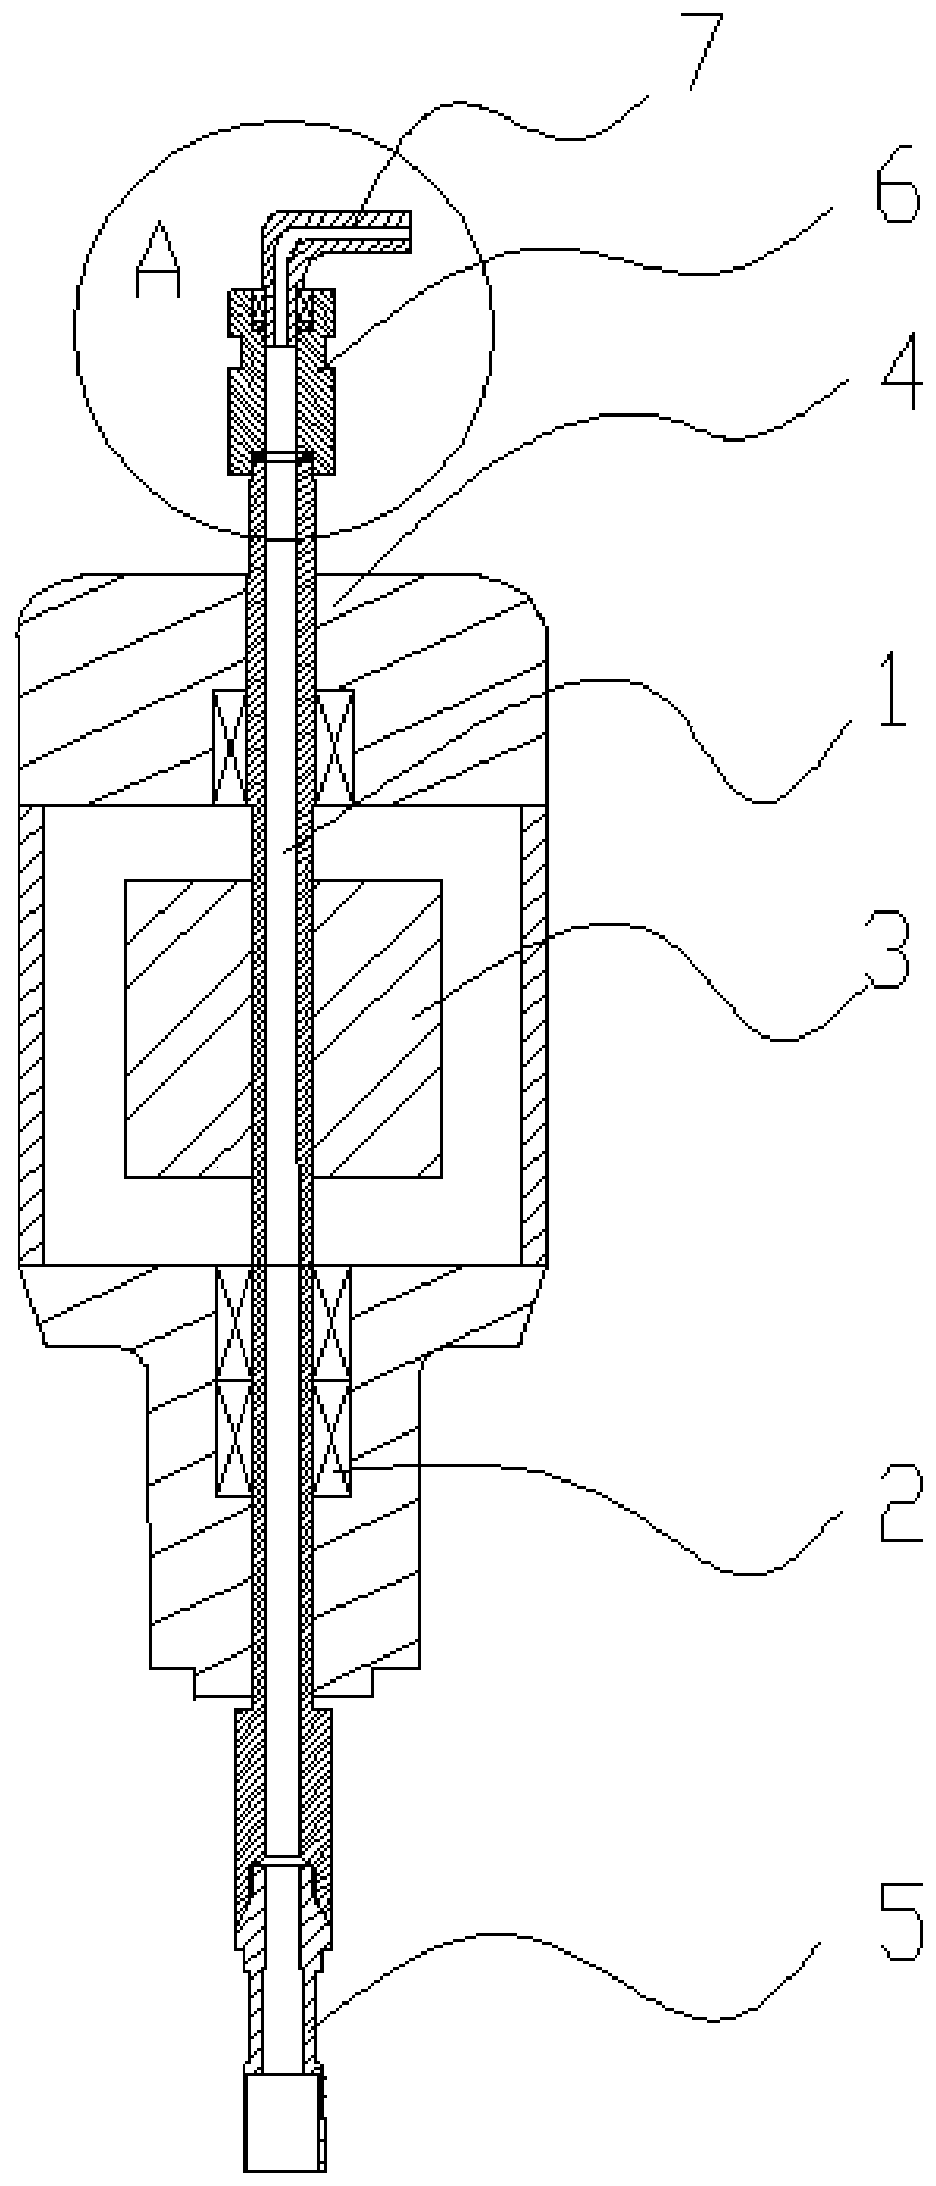 Integrated high-precision water passing motorized spindle structure